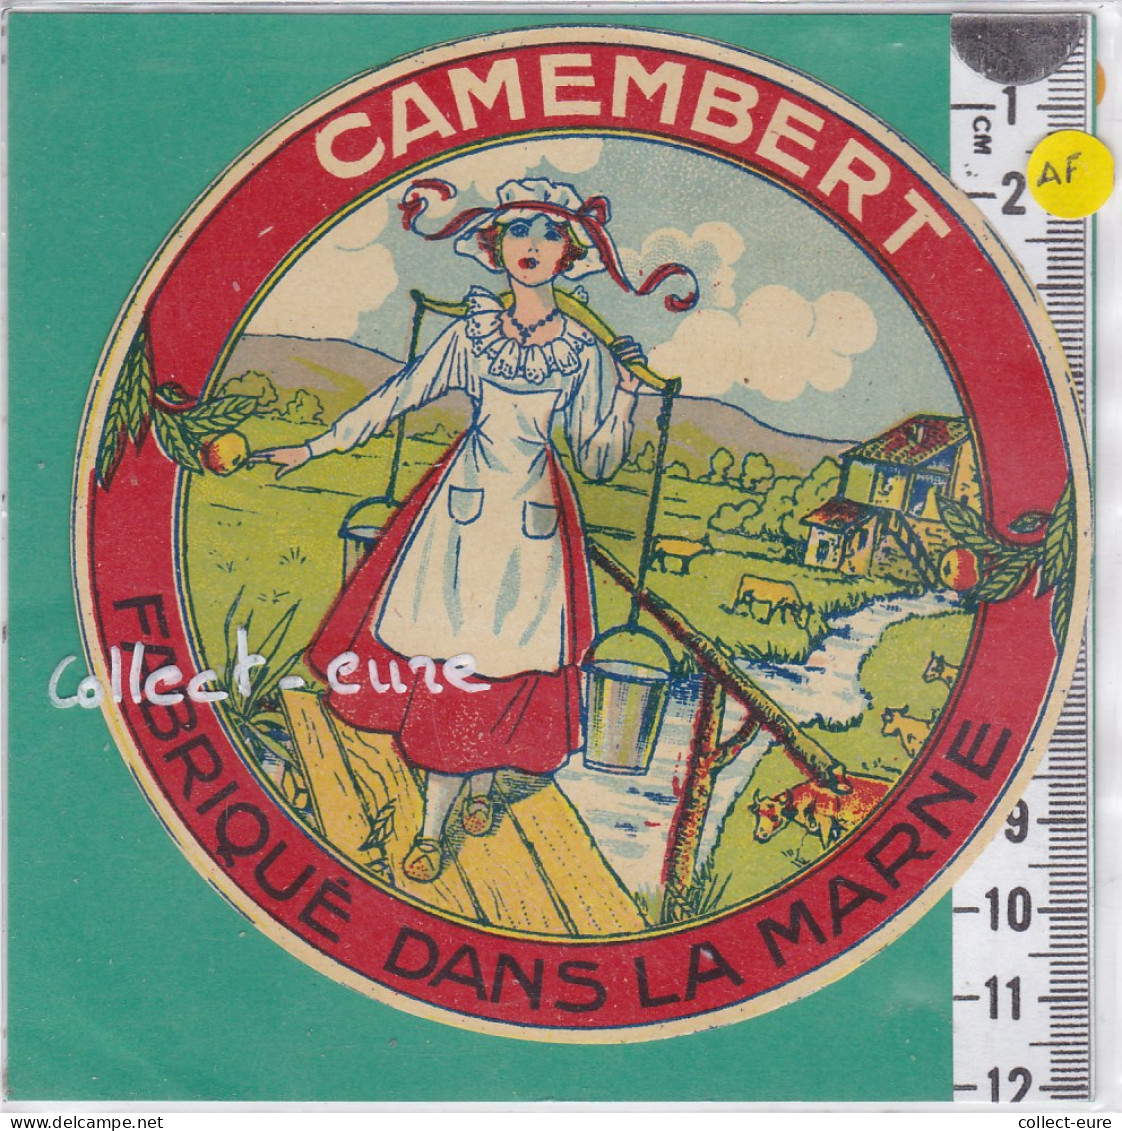 C1191 FROMAGE  CAMEMBERT  MARNE FEMME CARCAN  MOULIN A EAU  ?? RIVIERE - Quesos